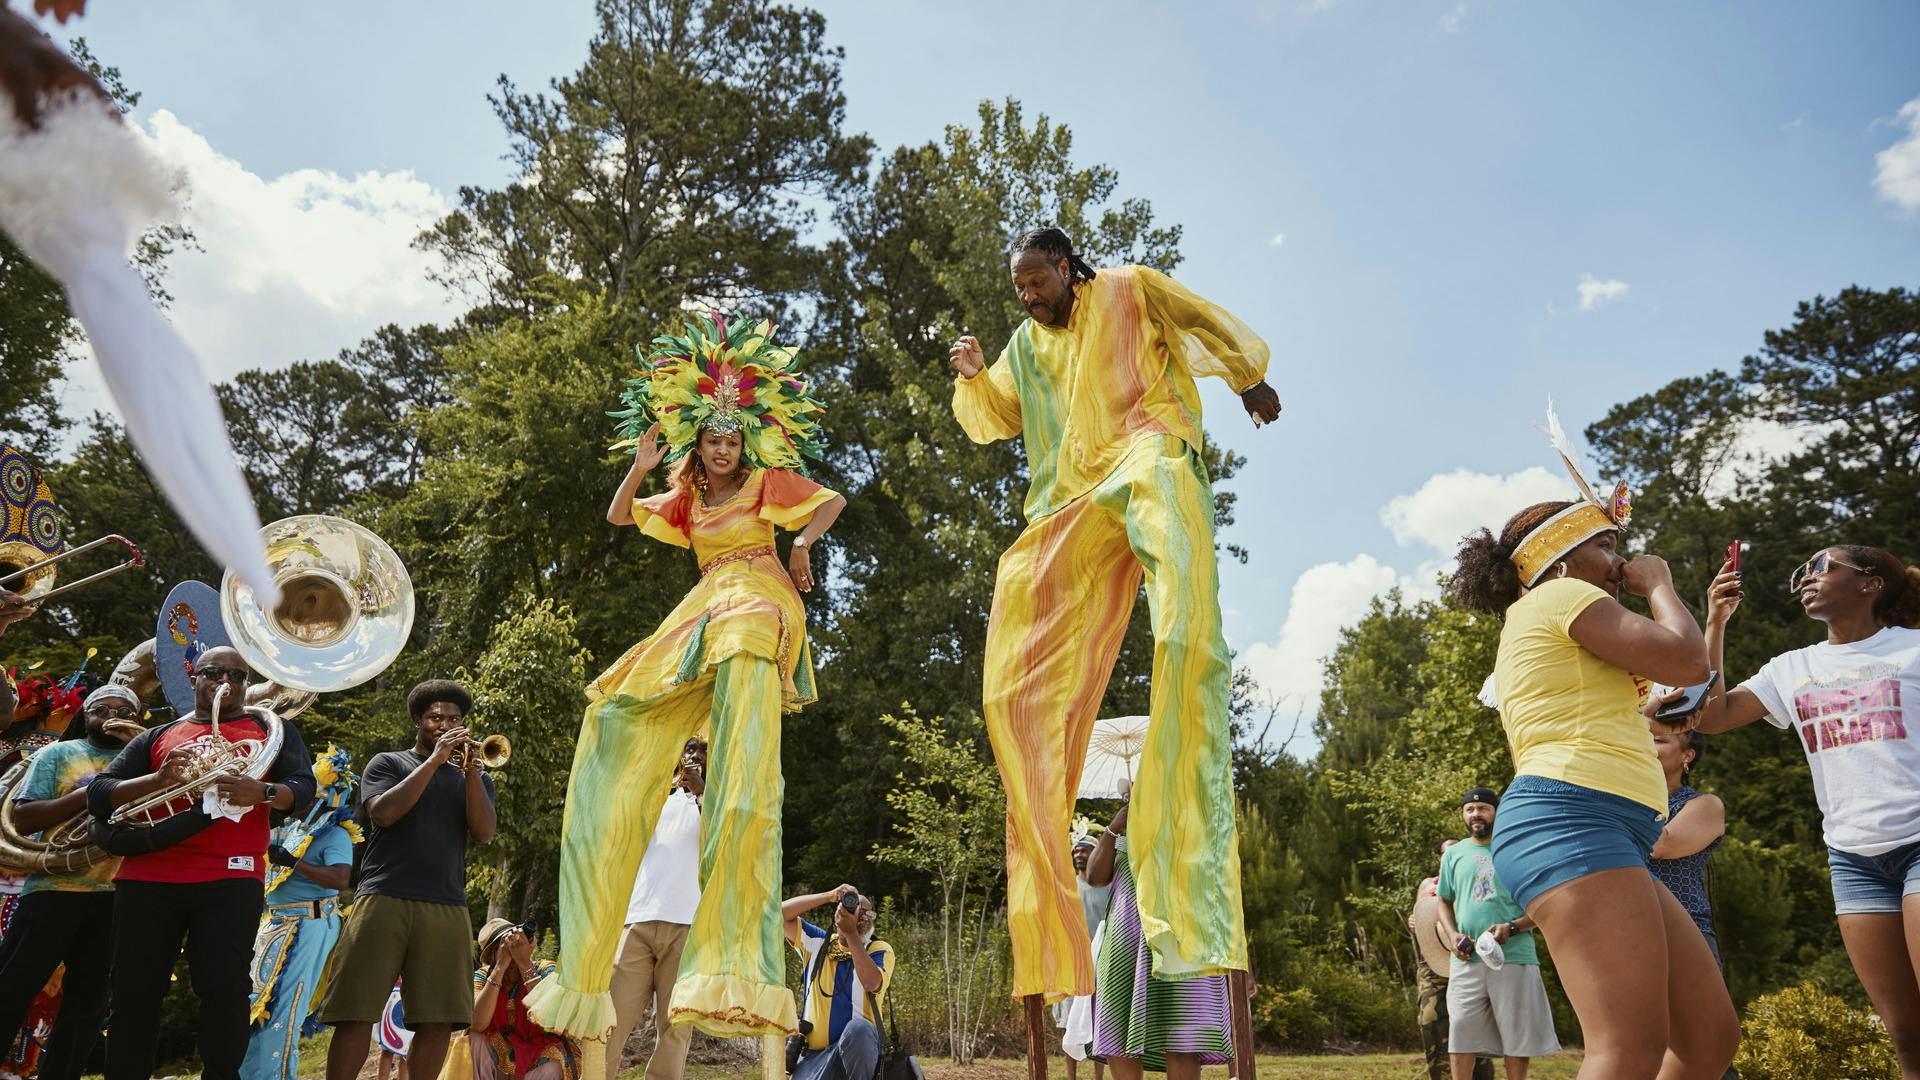 People on stilts in bright outfits perform to music.